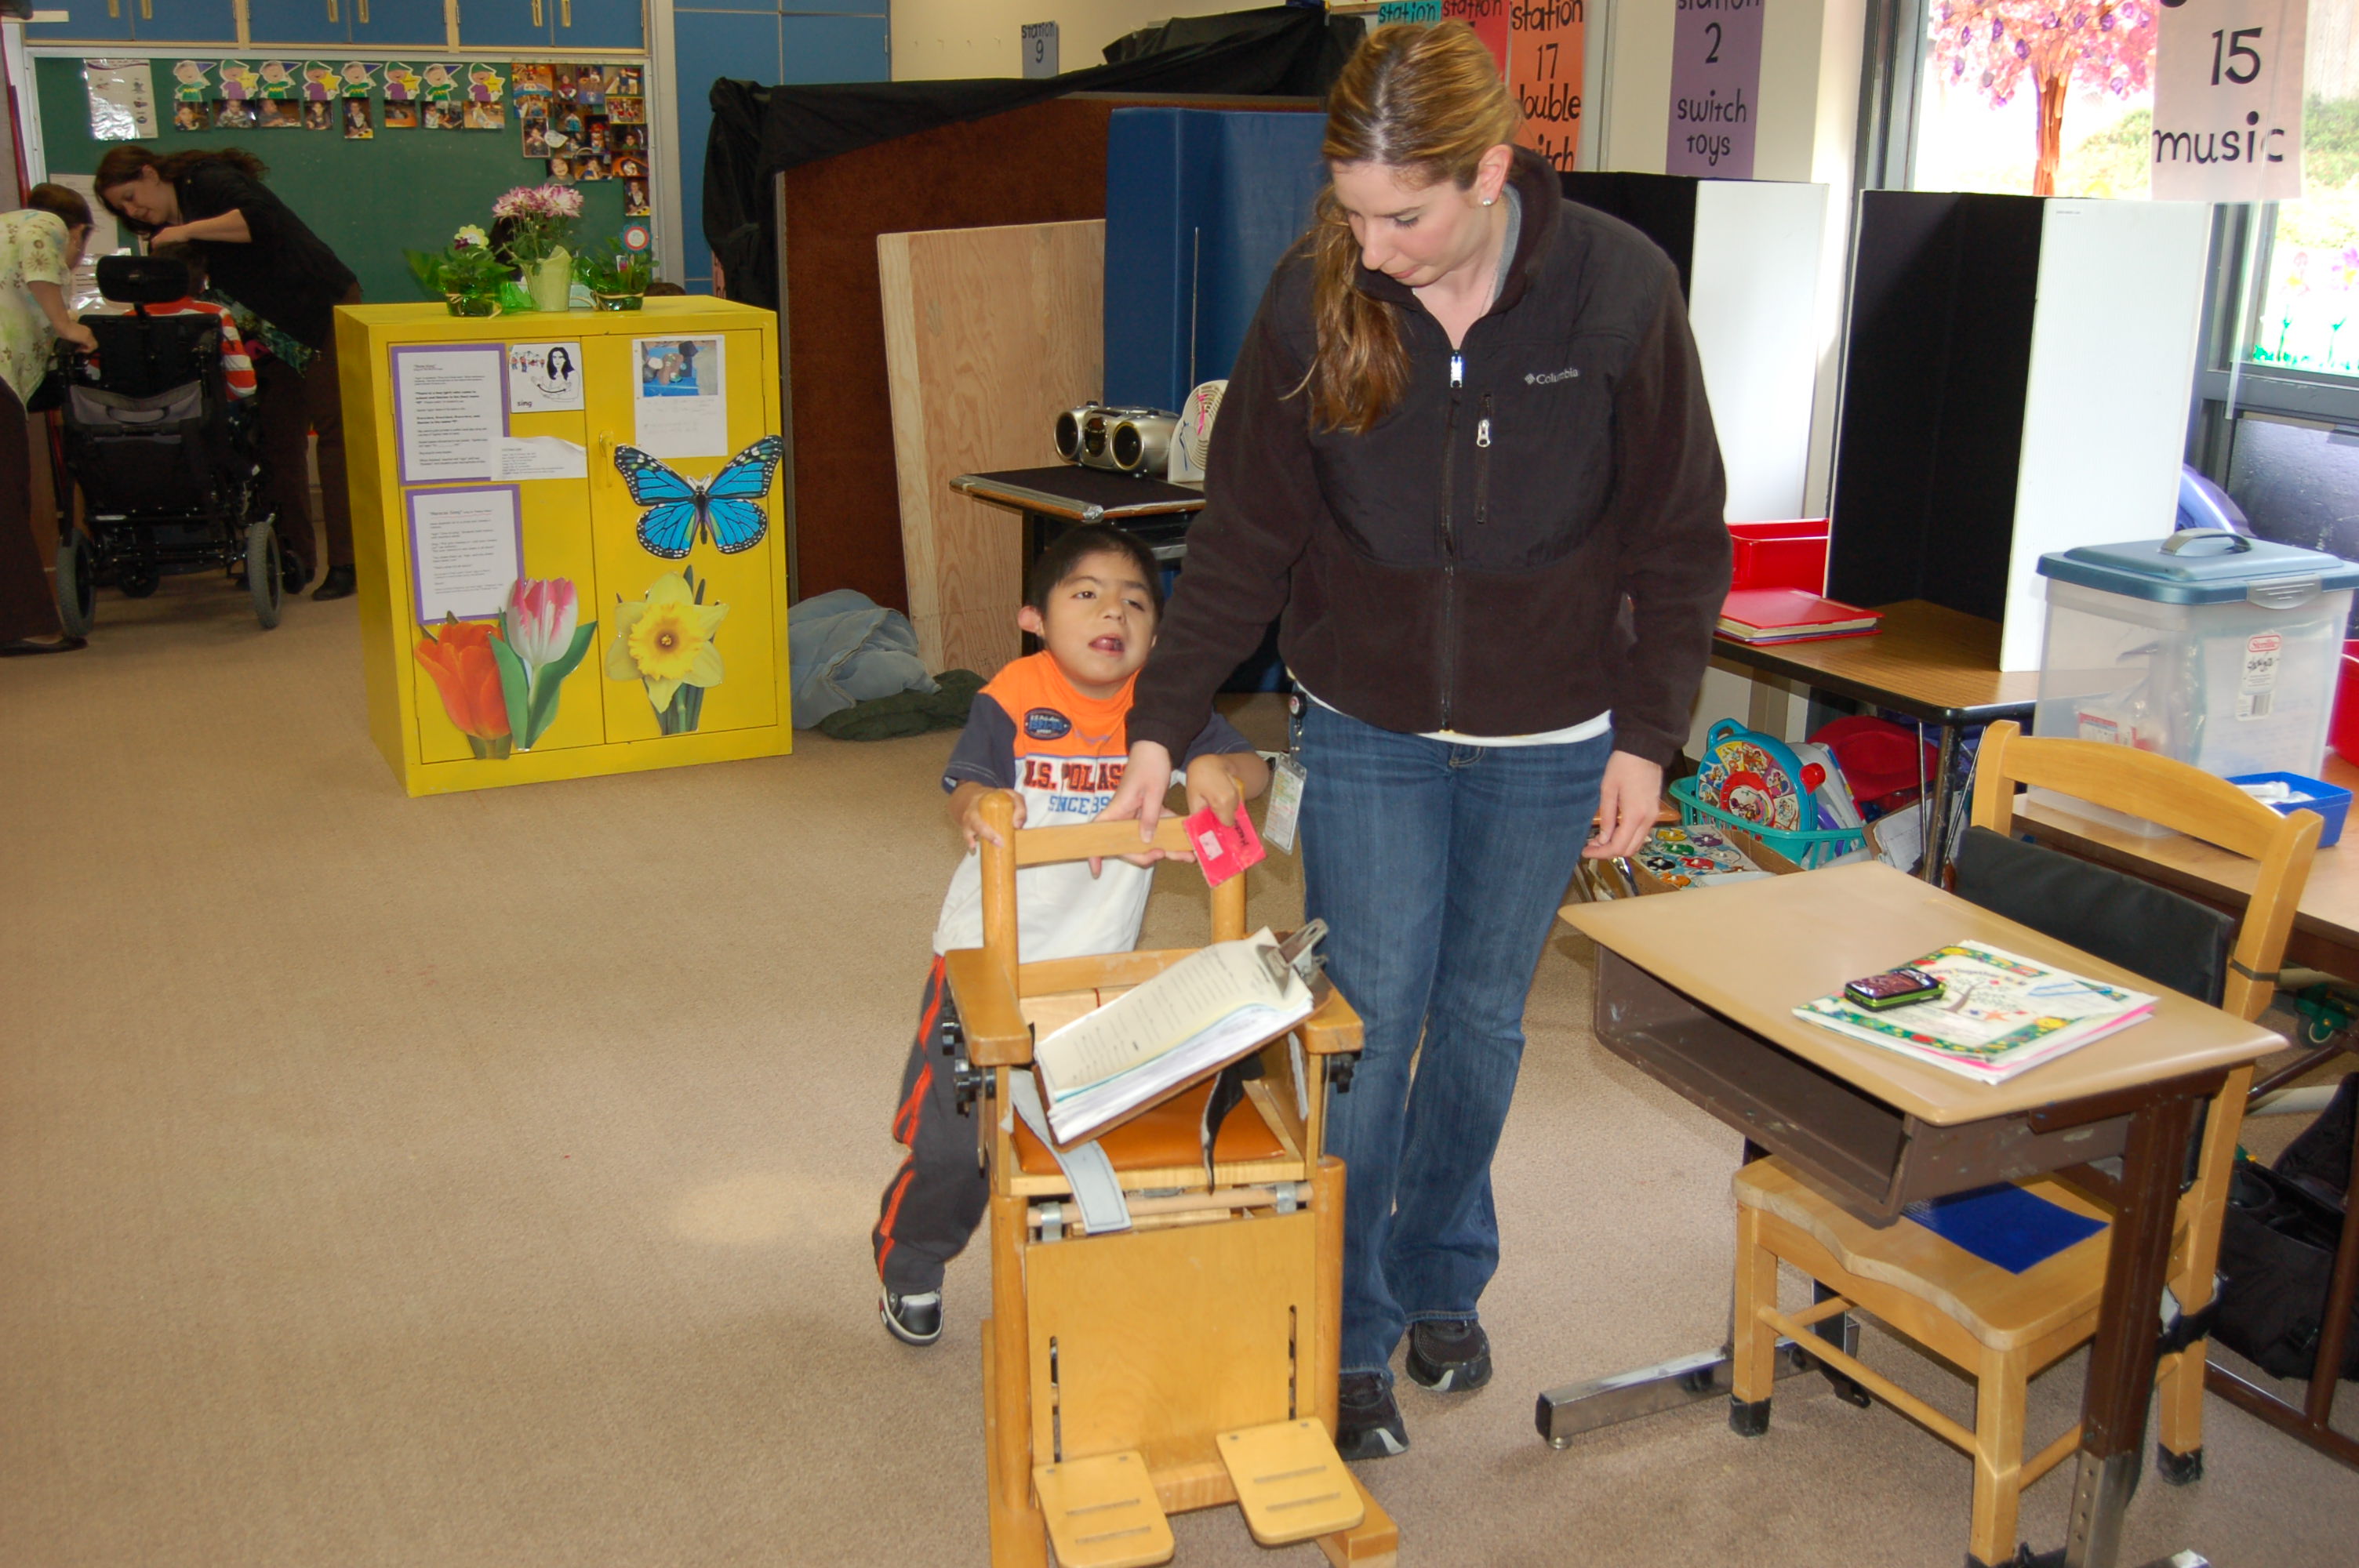 A young boy in a classroom is holding onto a specialized chair to support him while walking. He is assisted by an adult who also has her hand on the back of the chair.